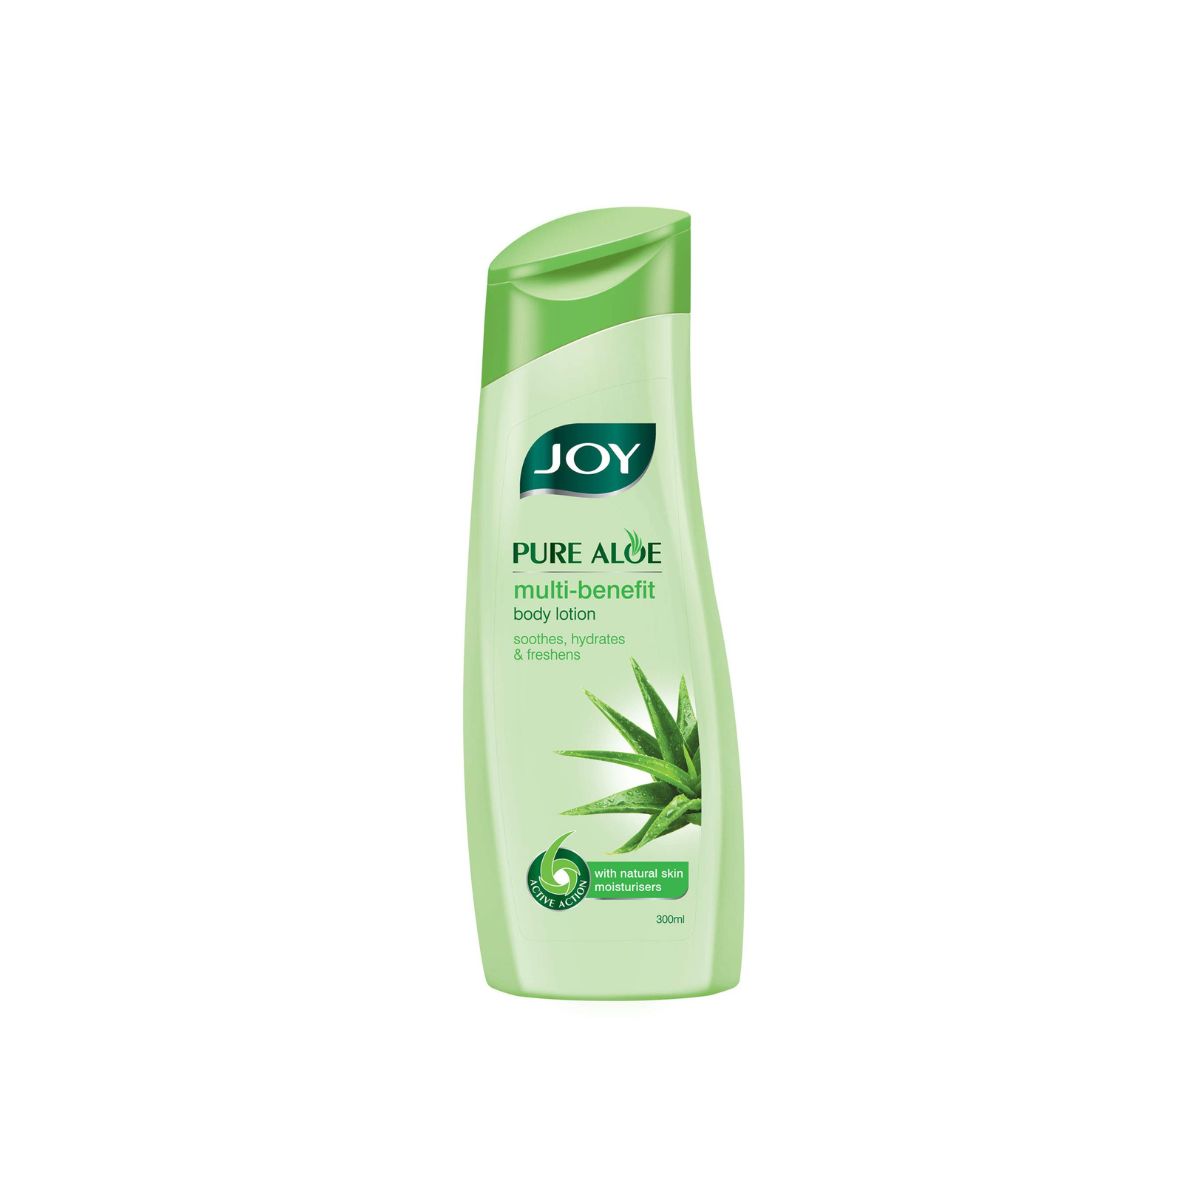 Joy Pure Aloe - Multi-Benefit Body Lotion - Soothes - Hydrates & Freshens - Natural Skin Moisturisers - 300ml